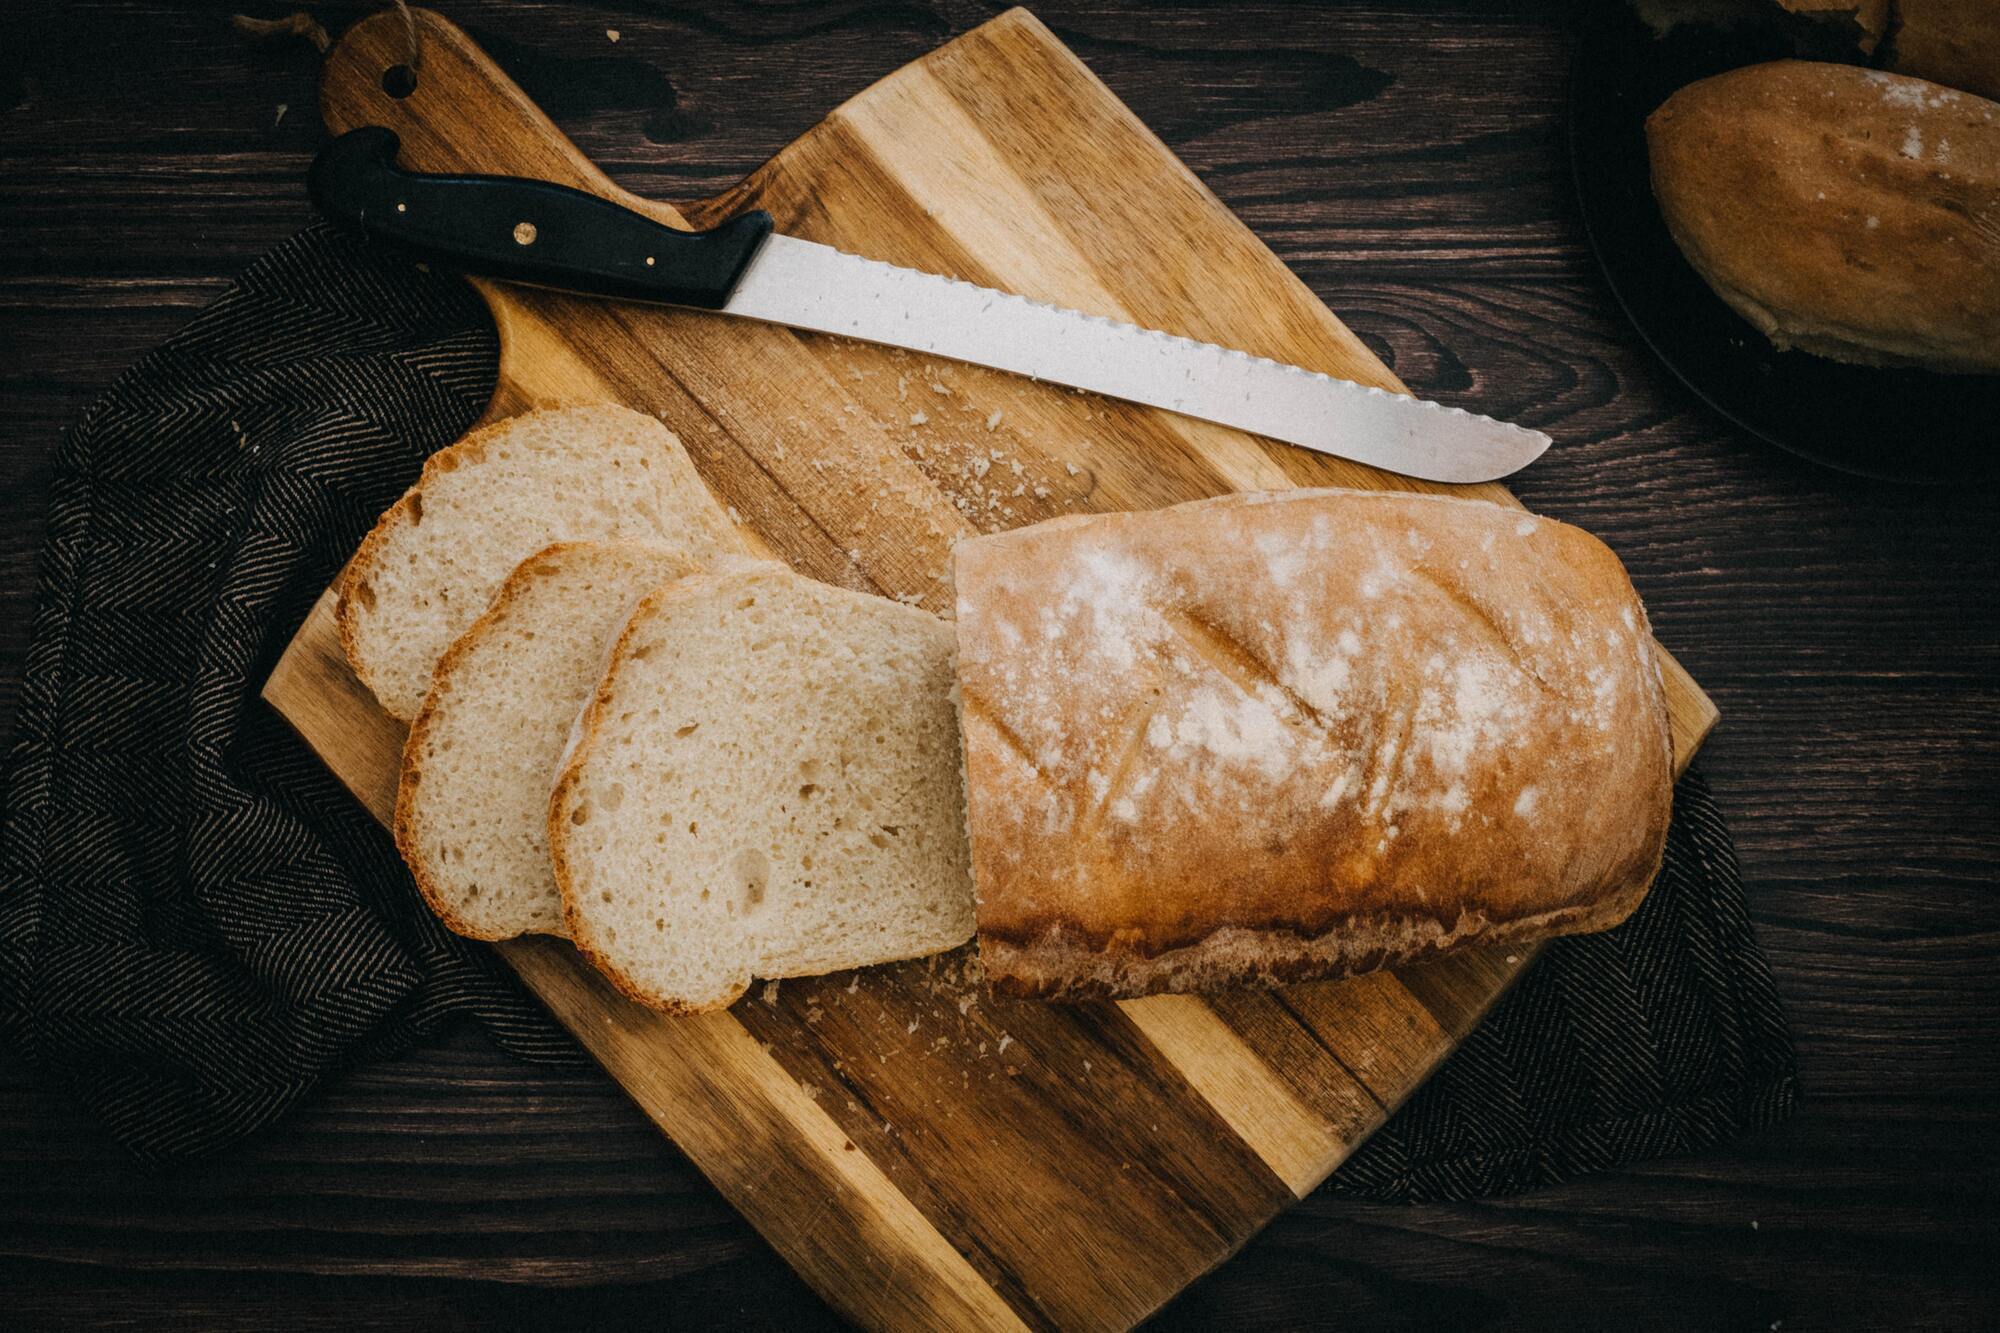 Store-bought bread